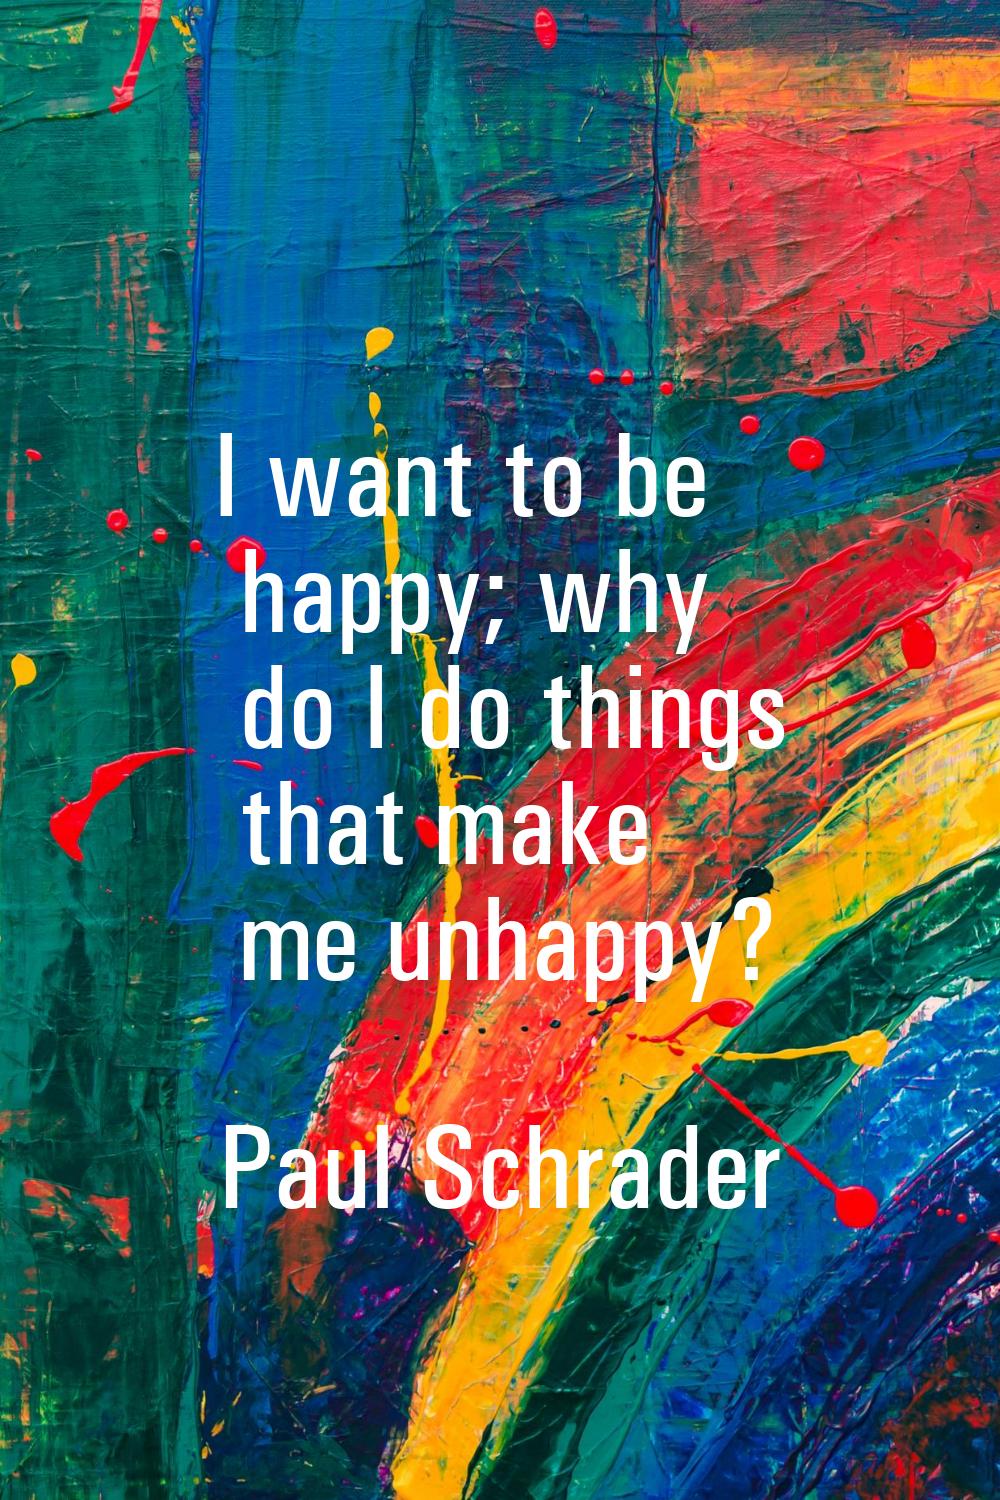 I want to be happy; why do I do things that make me unhappy?